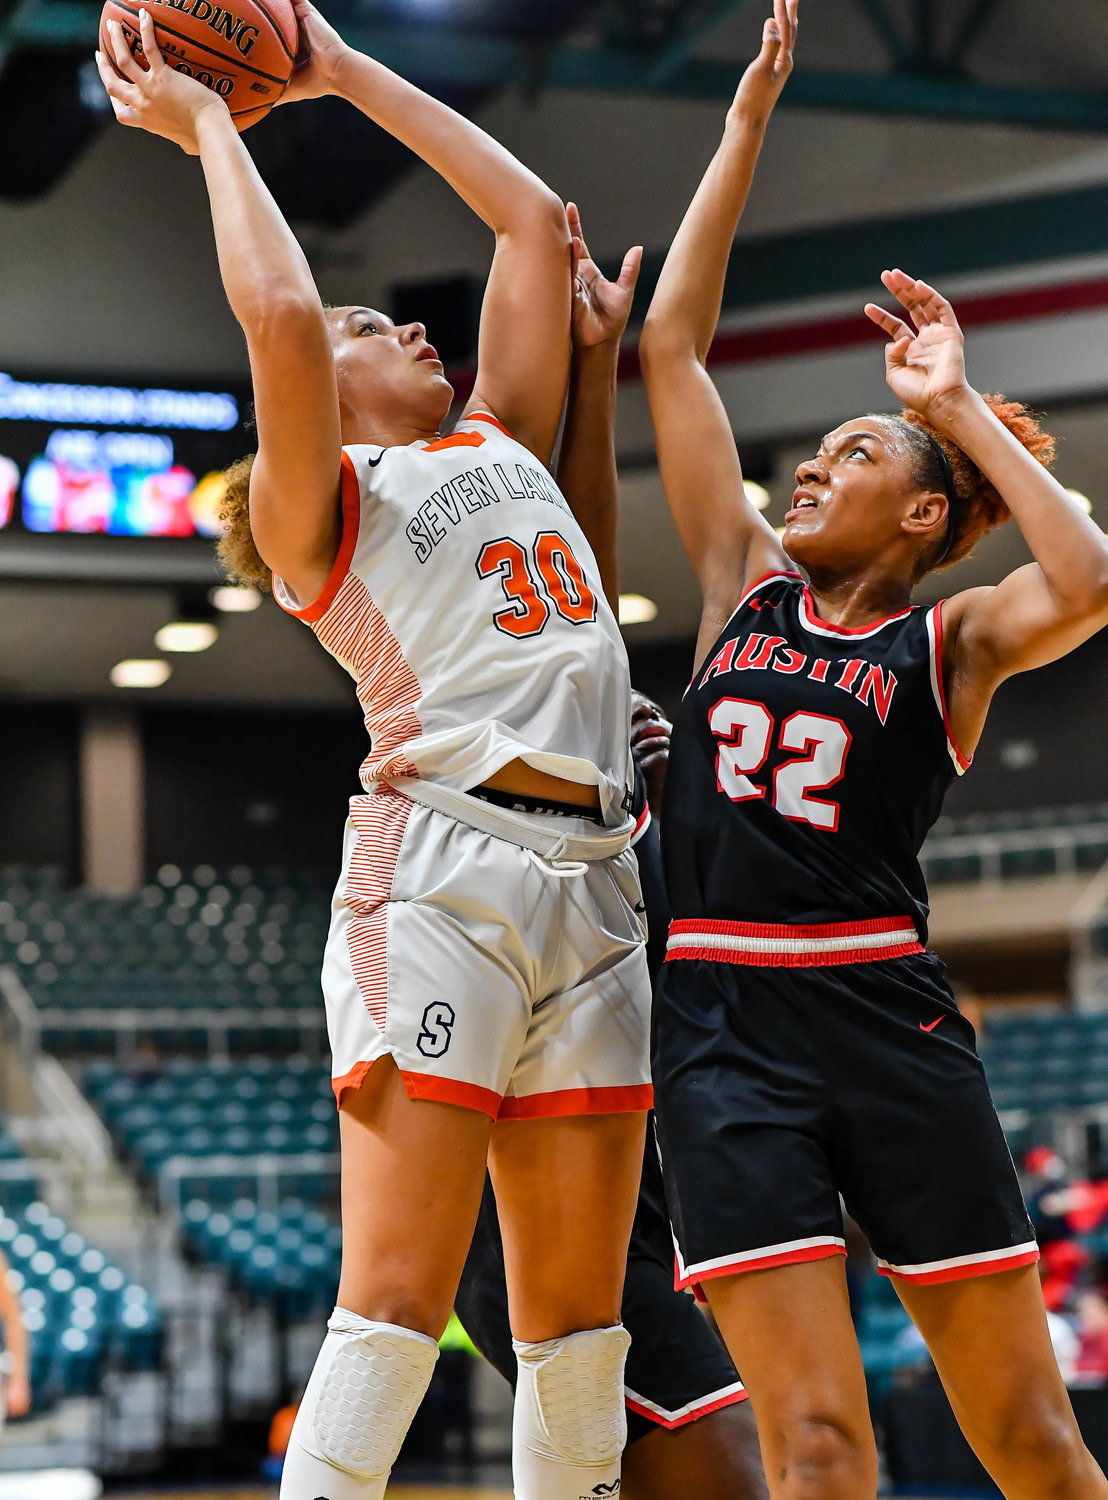 Katy Tx. Feb 22, 2022:  Seven Lakes Justice Carlton #30 goes up for the shot guarded by Fort Bend Austins Gabrielle Johnson #22 during the Regional Quarterfinal playoff game, Seven Lakes vs Fort Bend Austin at the Merrell Center. (Photo by Mark Goodman / Katy Times)